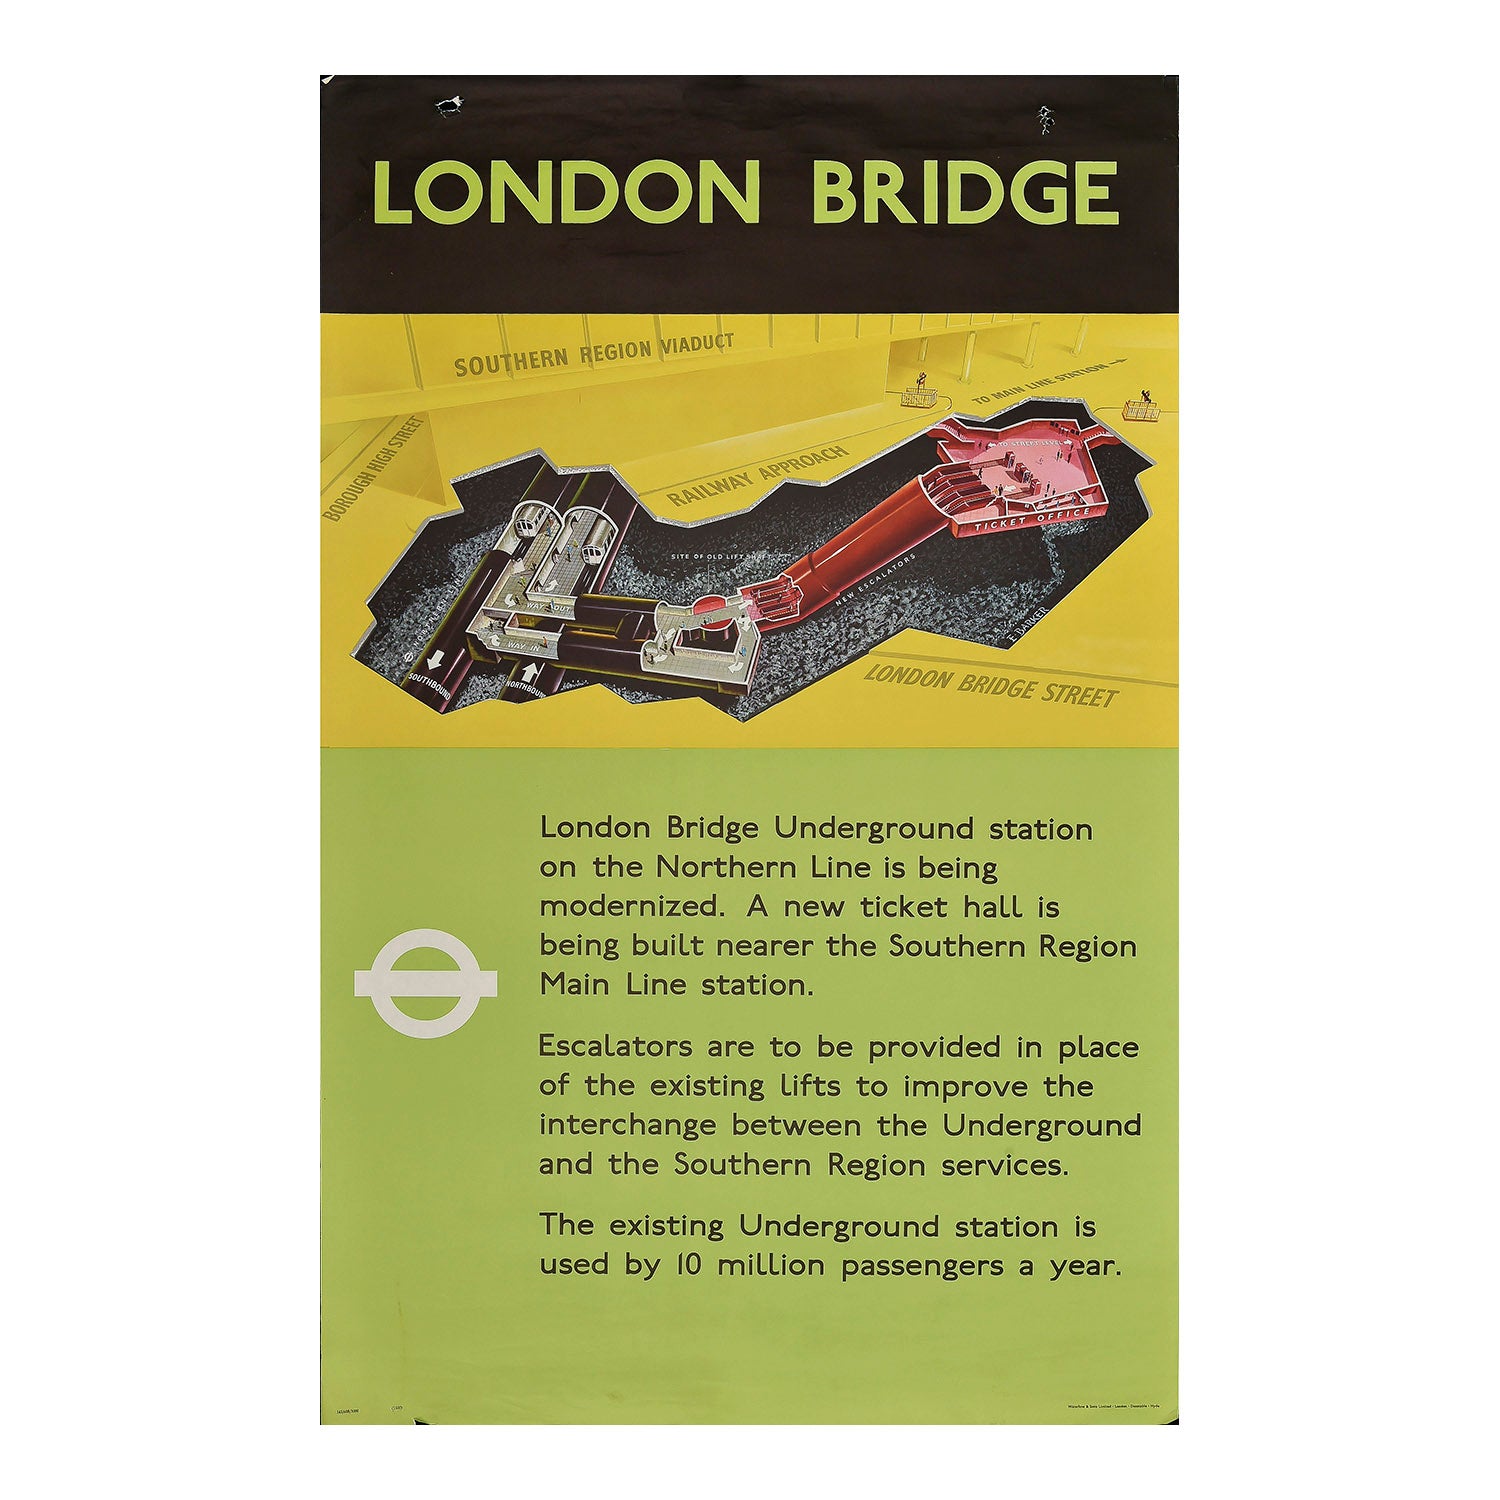  London Transport poster describing forthcoming engineering works at London Bridge station, Northern Line, 1965. Designed by E. Barker, the poster shows a cutaway of London Bridge station with the new works (escalator and ticket hall) shown in red. 